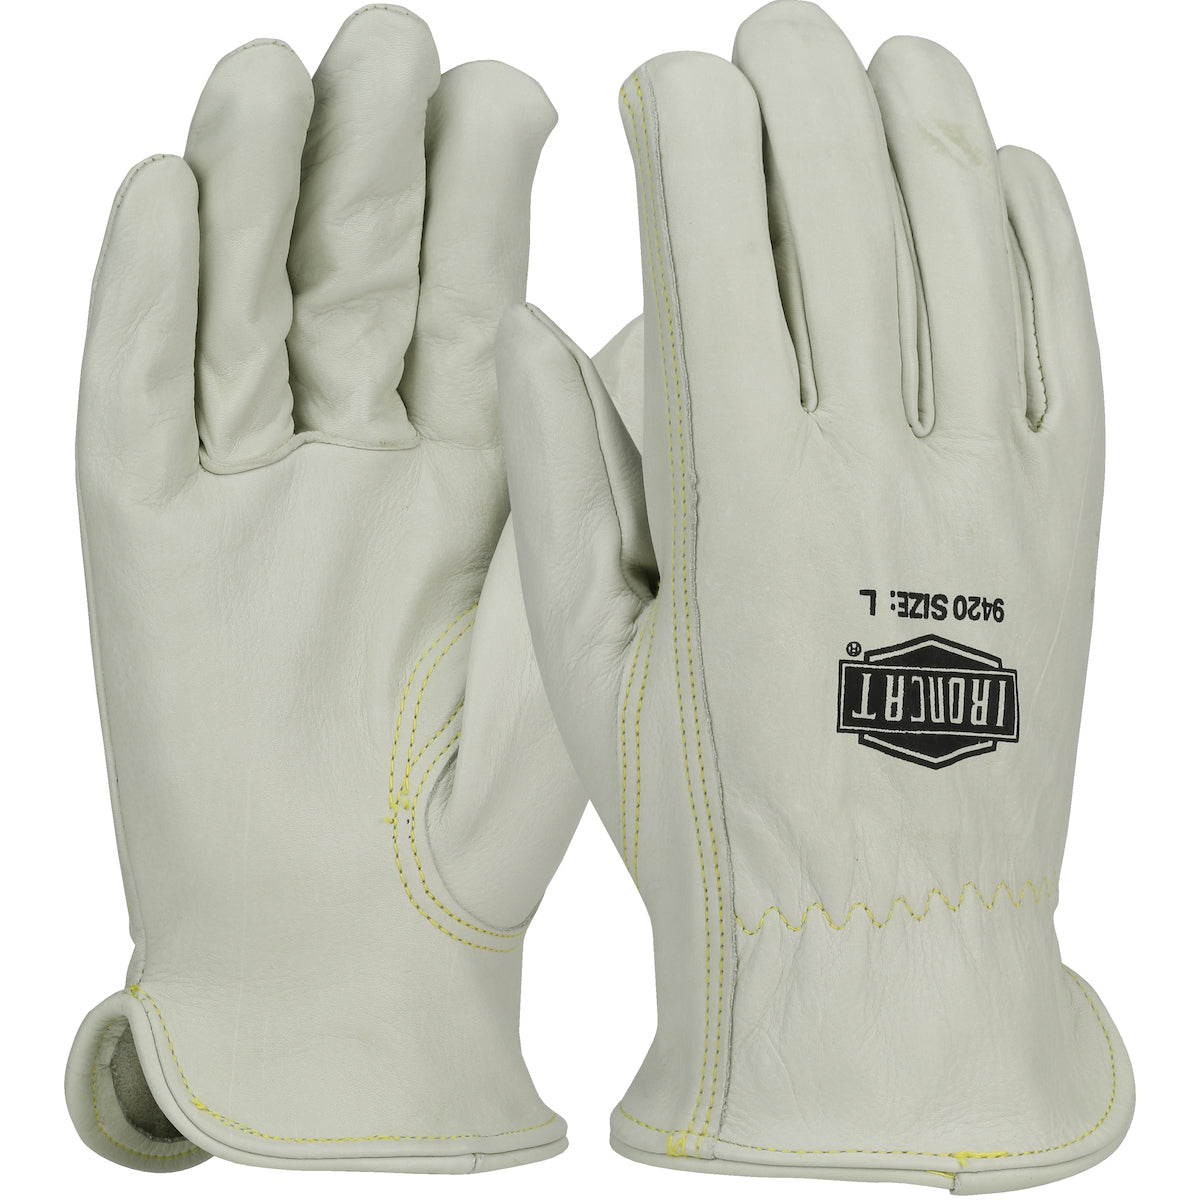 West Chester 9420/L Premium Grade Top Grain Cowhide Leather Drivers Glove - Keystone Thumb